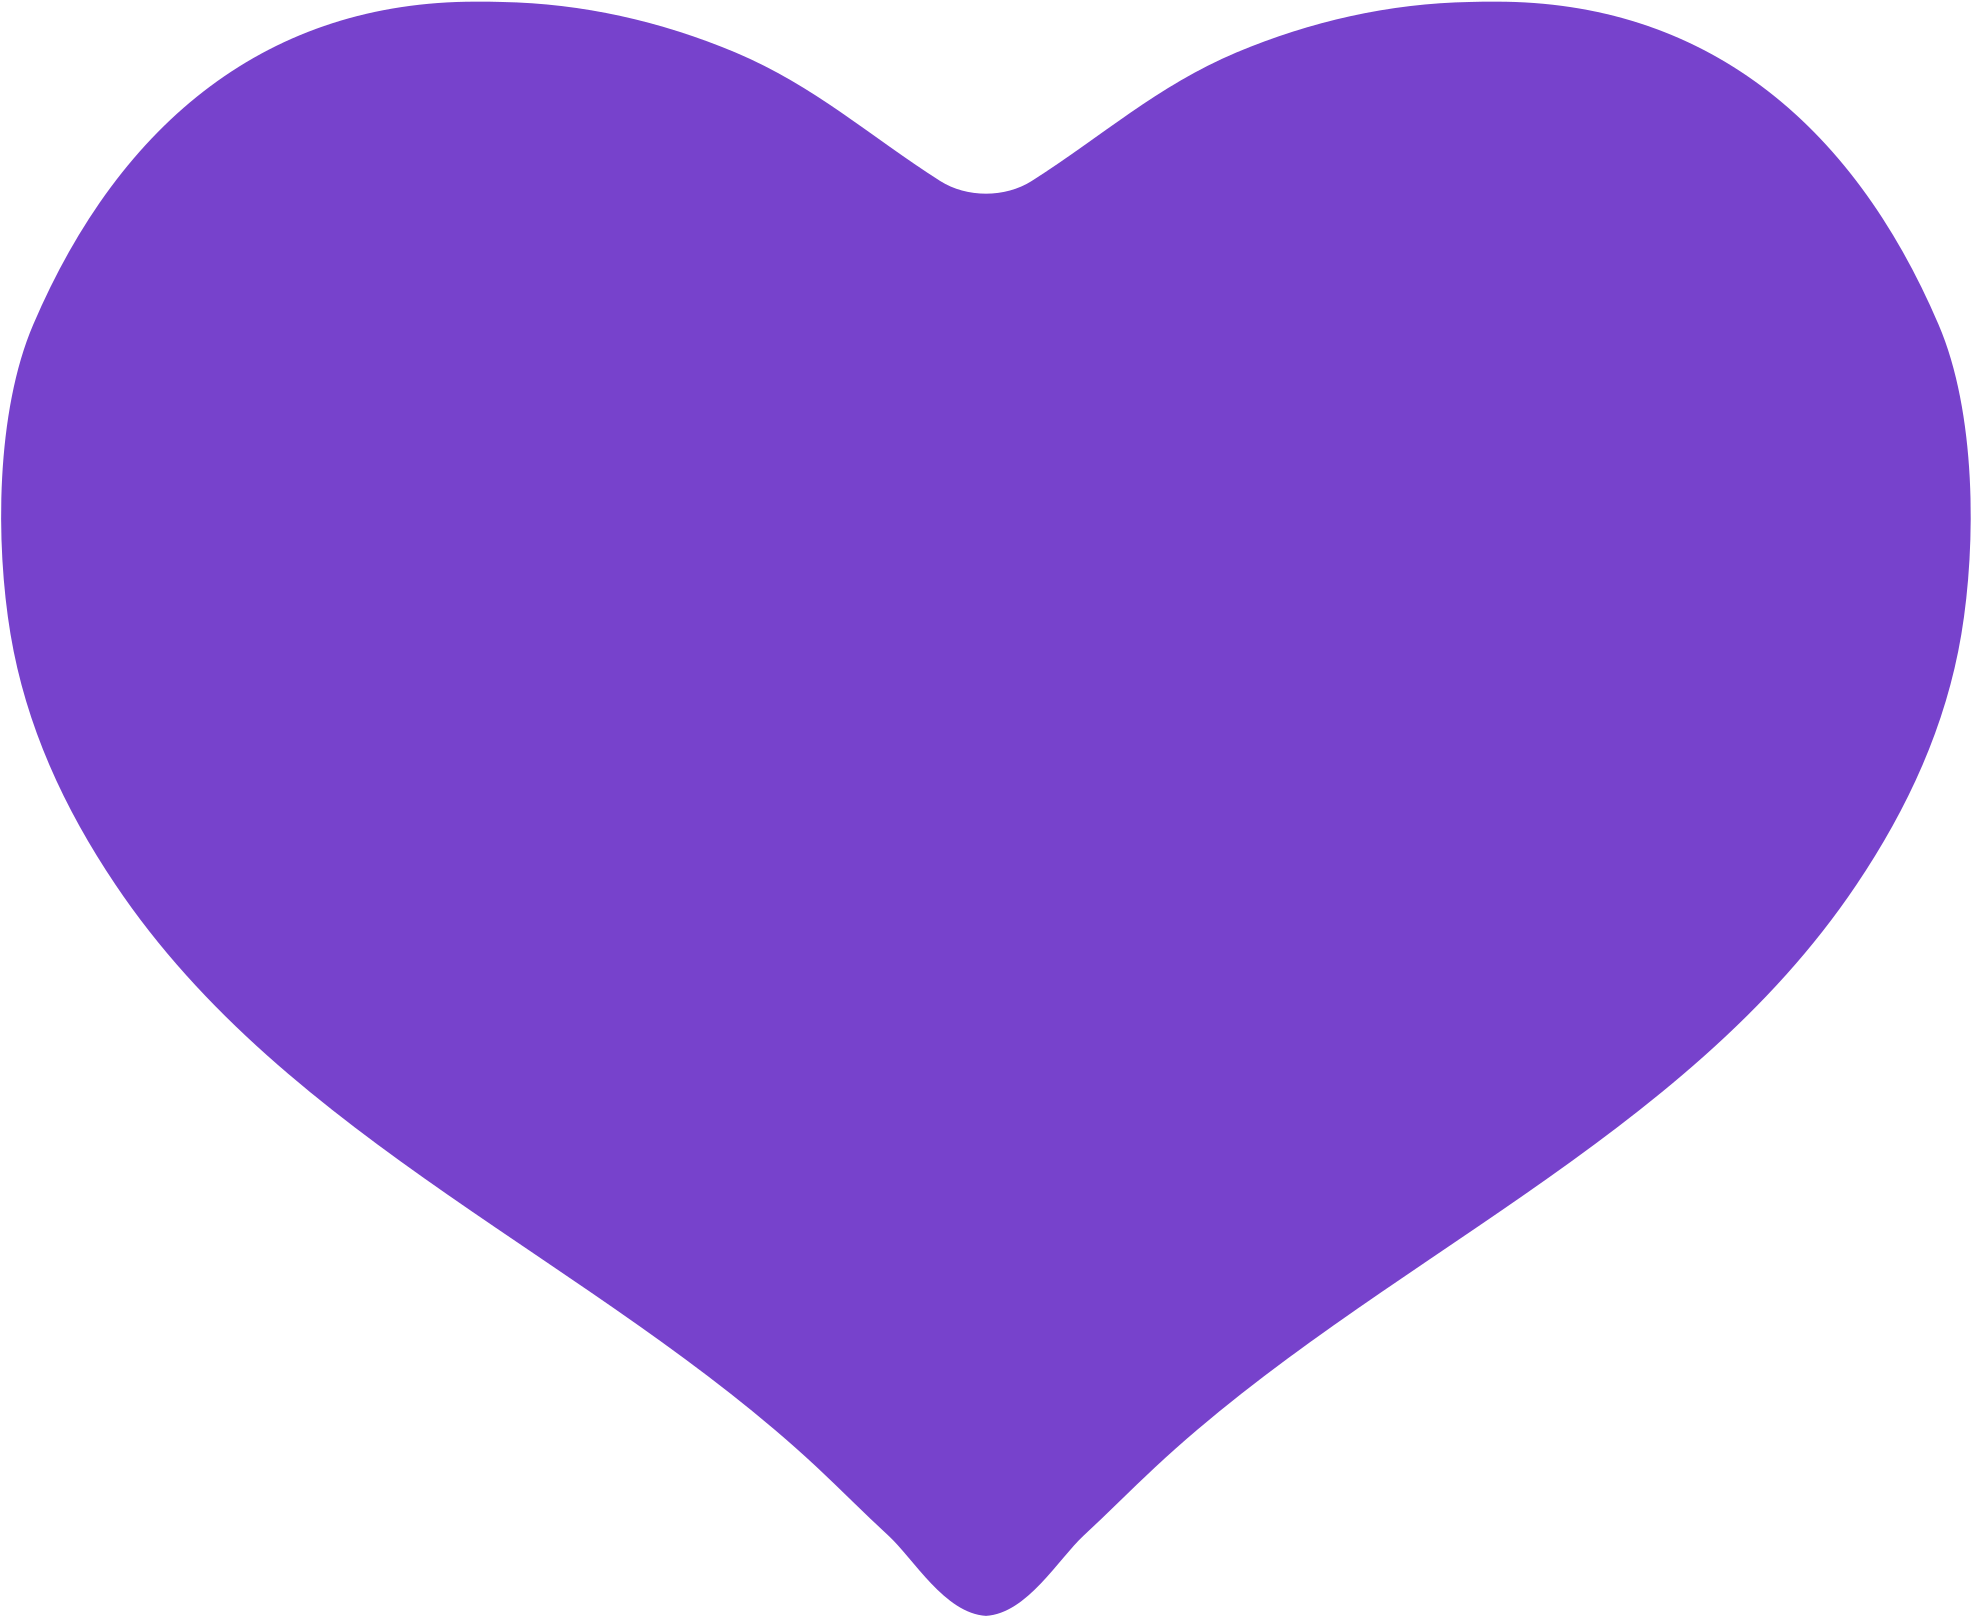 Decoding the Purple Heart Emoji Meaning from a Guy What Does it Really Mean?